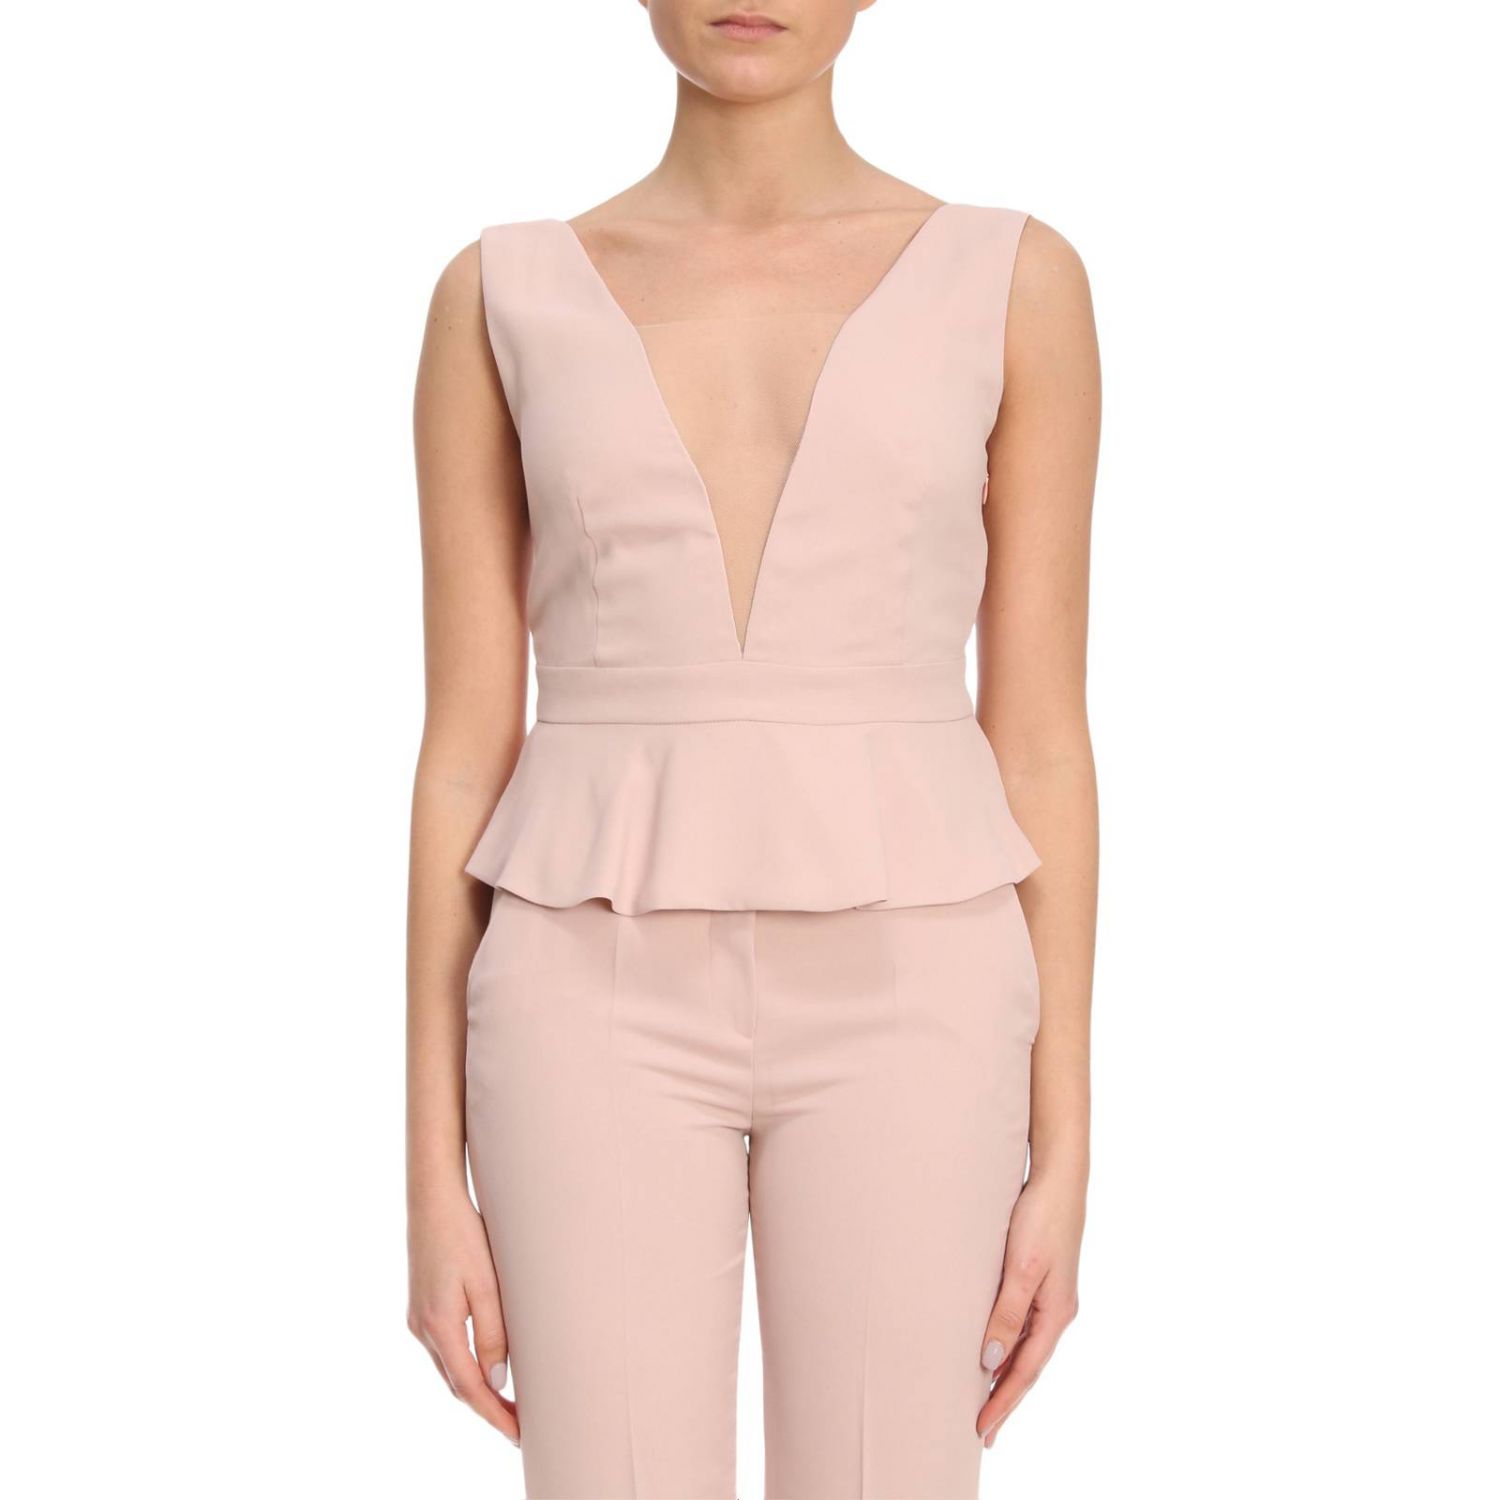 Top women H Couture | Top H Couture Women Blush Pink | Top H Couture ...